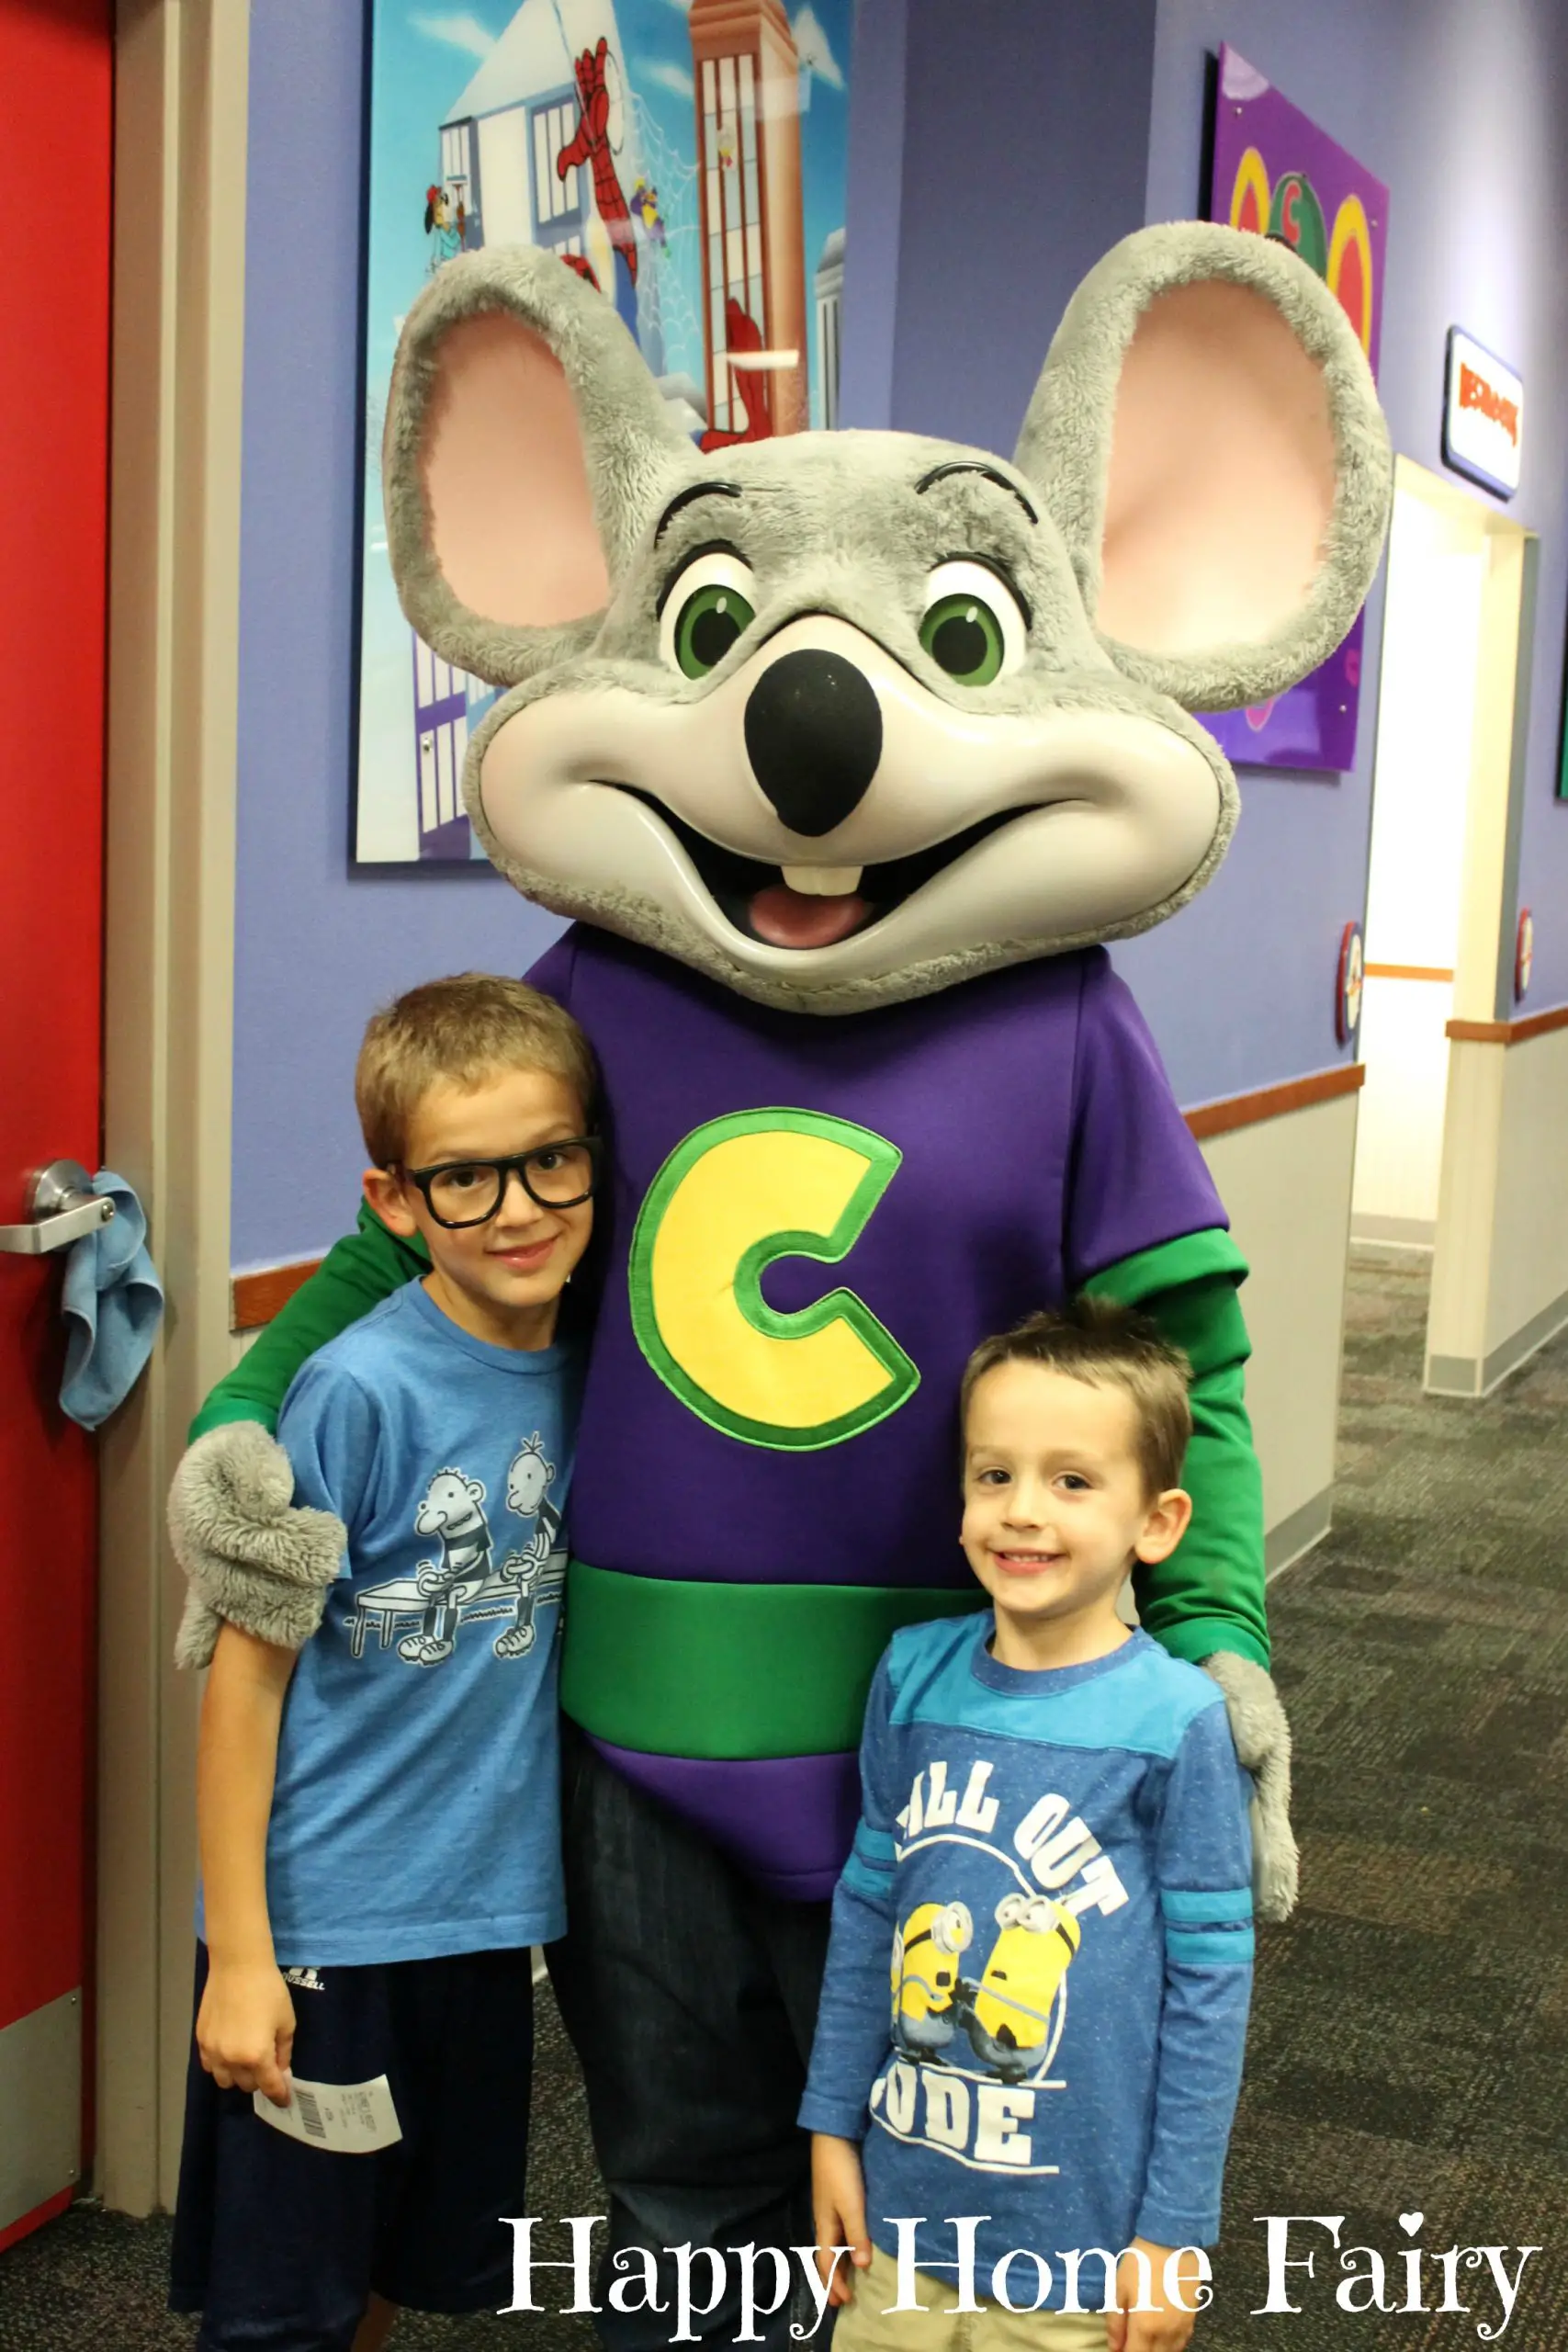 Kids Can Play Safe at Chuck E. Cheese